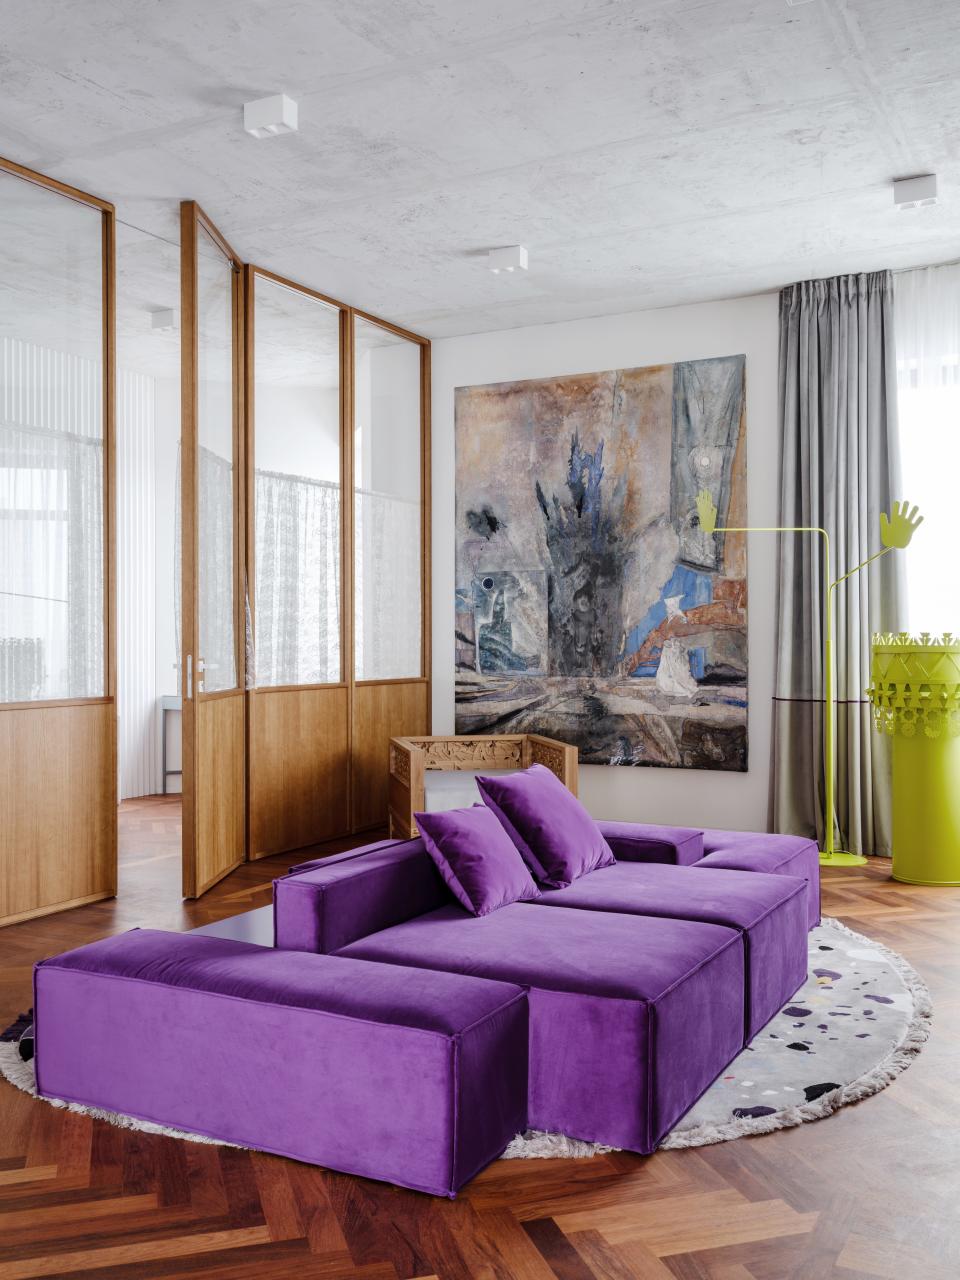 For fashion designer Ksenia Chilingarova's Moscow apartment, Crosby Studios' Harry Nuriev took inspiration from Soviet office design. In the living room, parquet floors and wood-paneled walls are paired with a custom purple sofa, carved-oak chair, lamp by Nuriev for Opening Ceremony, and painting by Nikolay Koshelev.